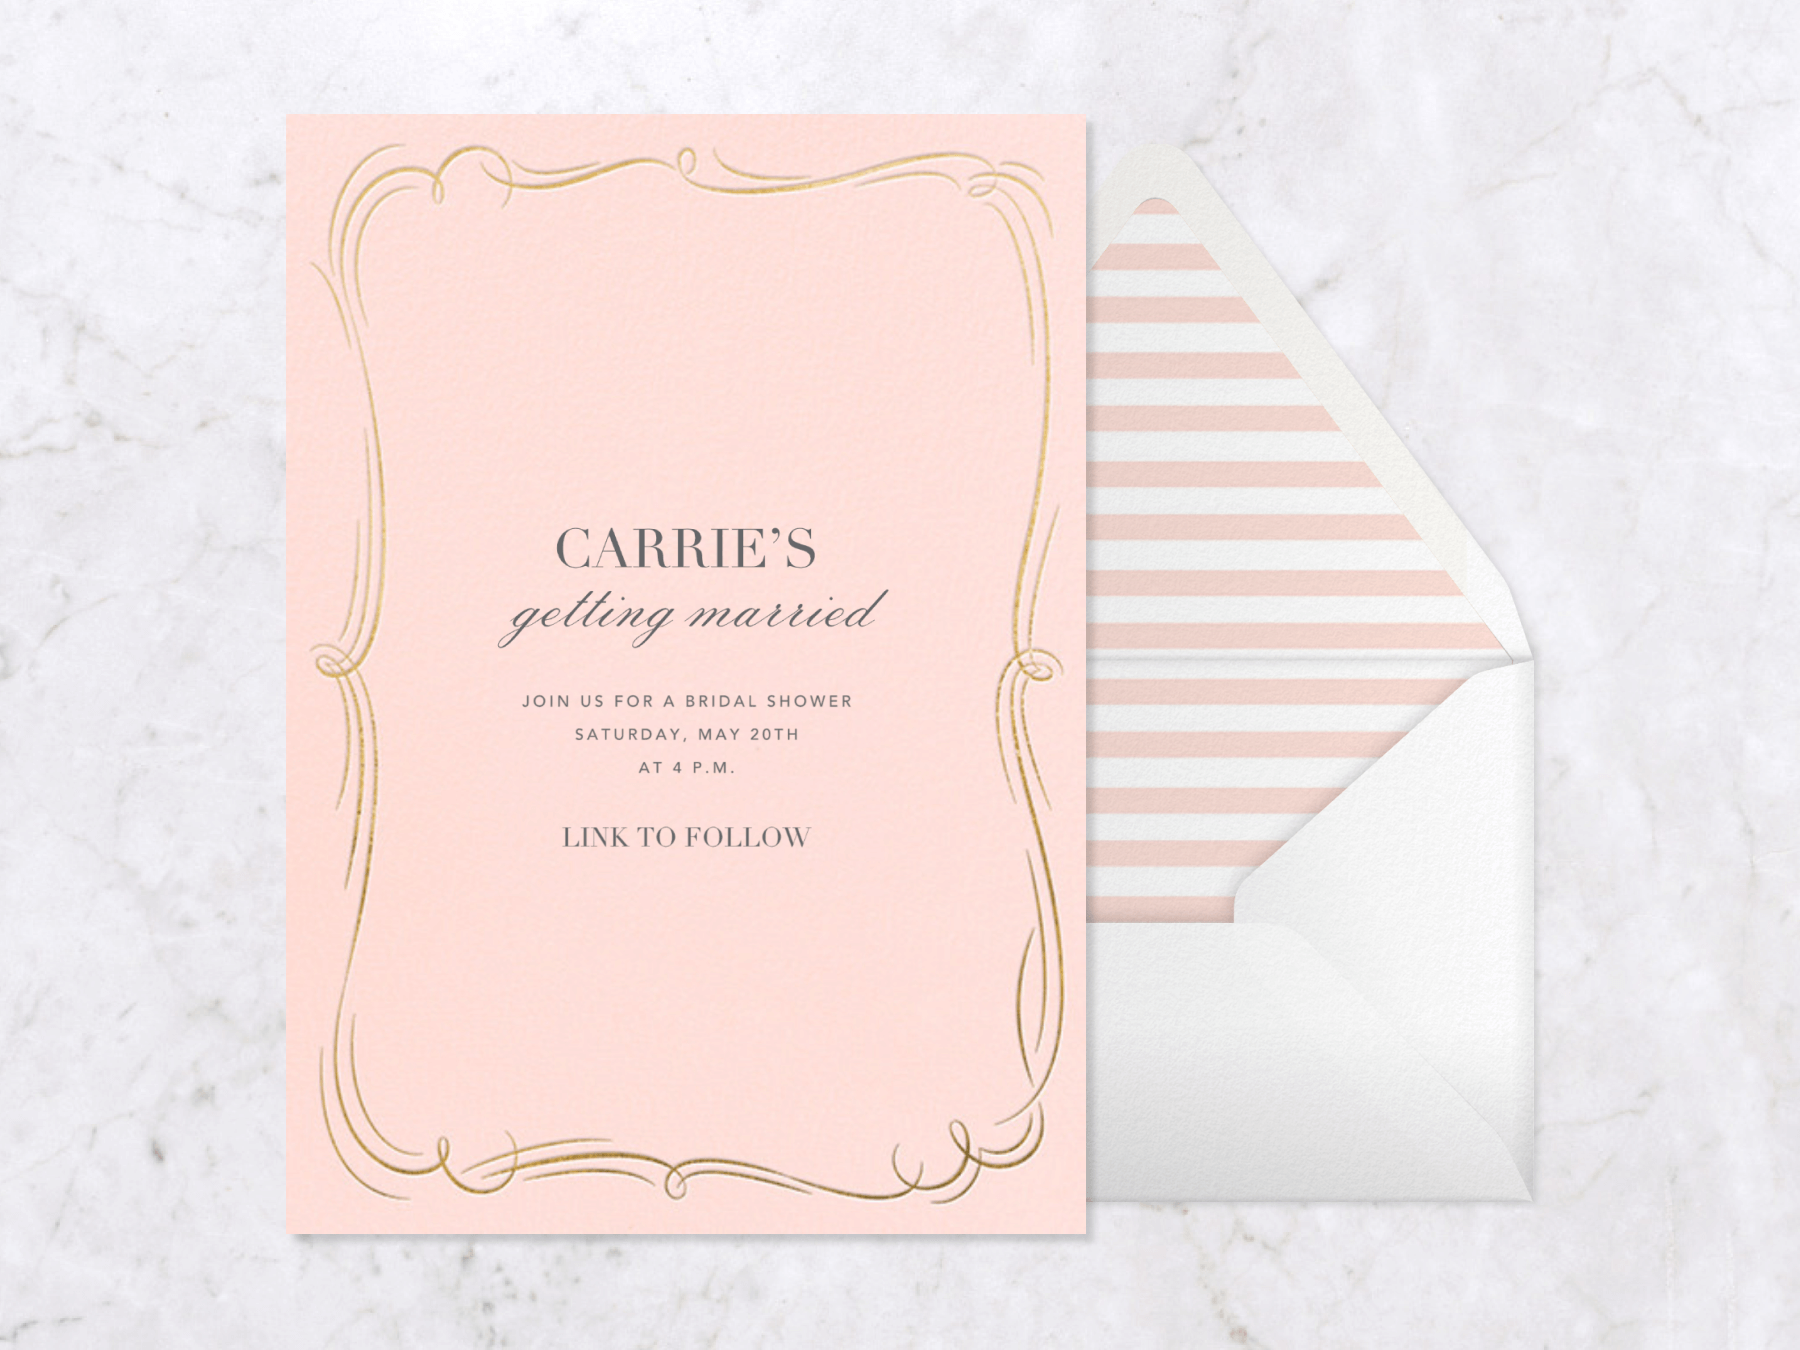 A virtual bridal shower invitation with a pink background and a curly gold border, paired with a white envelope with a pink striped liner.